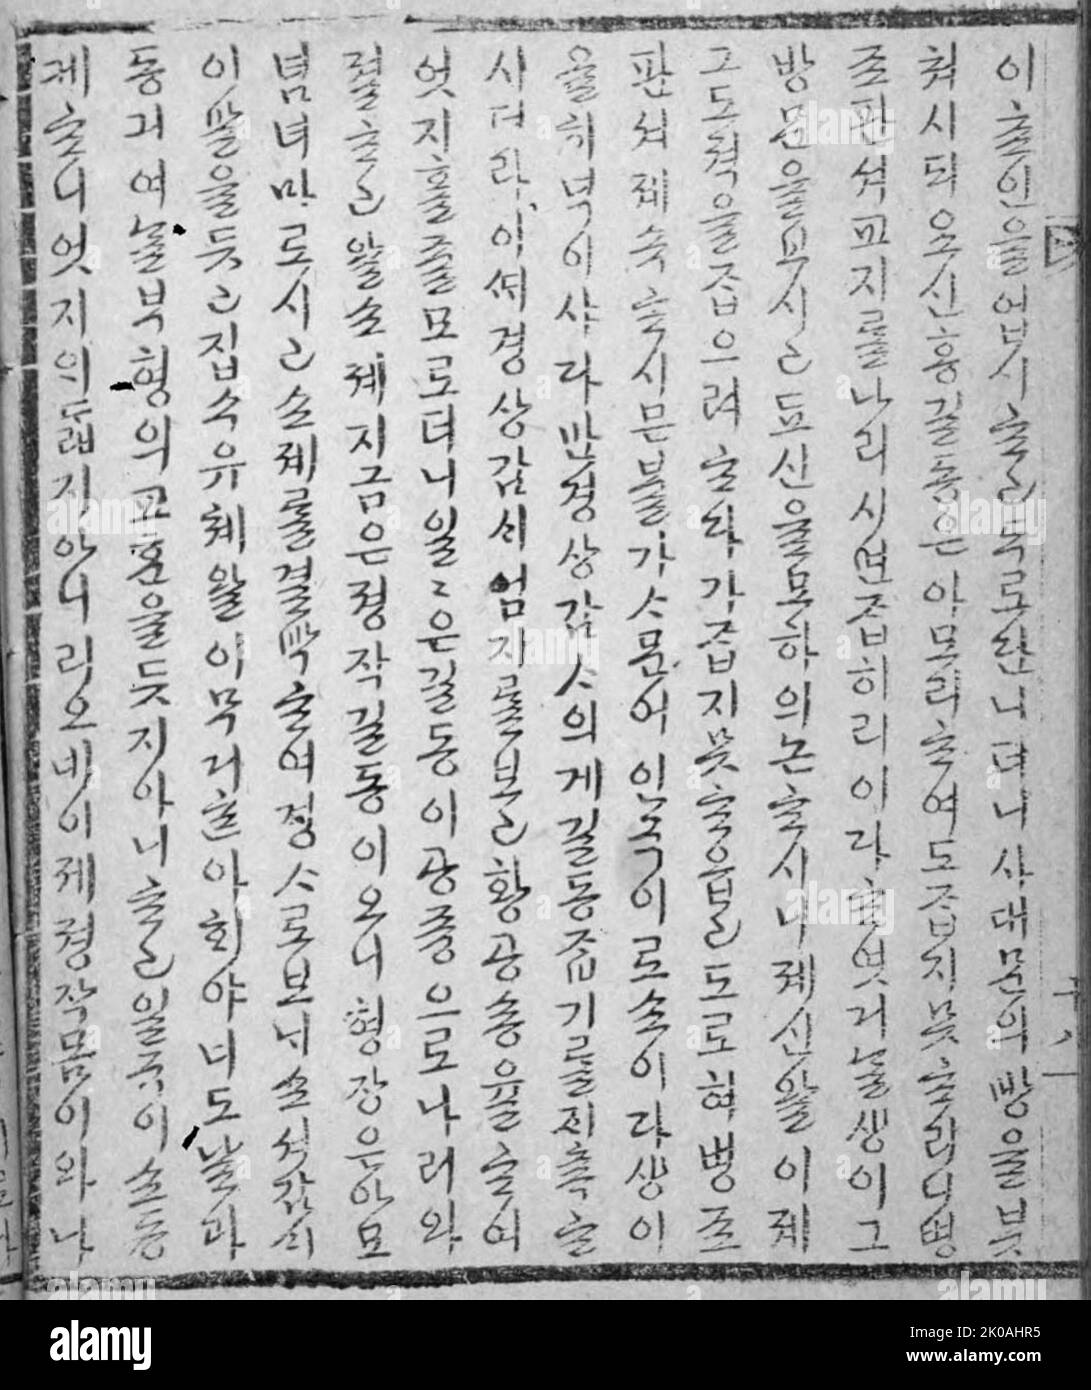 Tale of Hong Gildong is one of the first novels written in Hangul, the Korean alphabet, in the middle of the Joseon Dynasty. The novel is by Heo Gyun (Ho Kyun, 1569-1618), whose revolutionary thinking is reflected in the story's emphasis on breaking down differences in status and reforming corrupt politics. The main character of the novel, Hong Gildong, was the child of a nobleman and a female servant. Even though he was very intelligent and talented, Hong Gildong was never accepted as a son of a noble family because of a rigid status system. After he left home, Hong Gildong became a bandit le Stock Photo